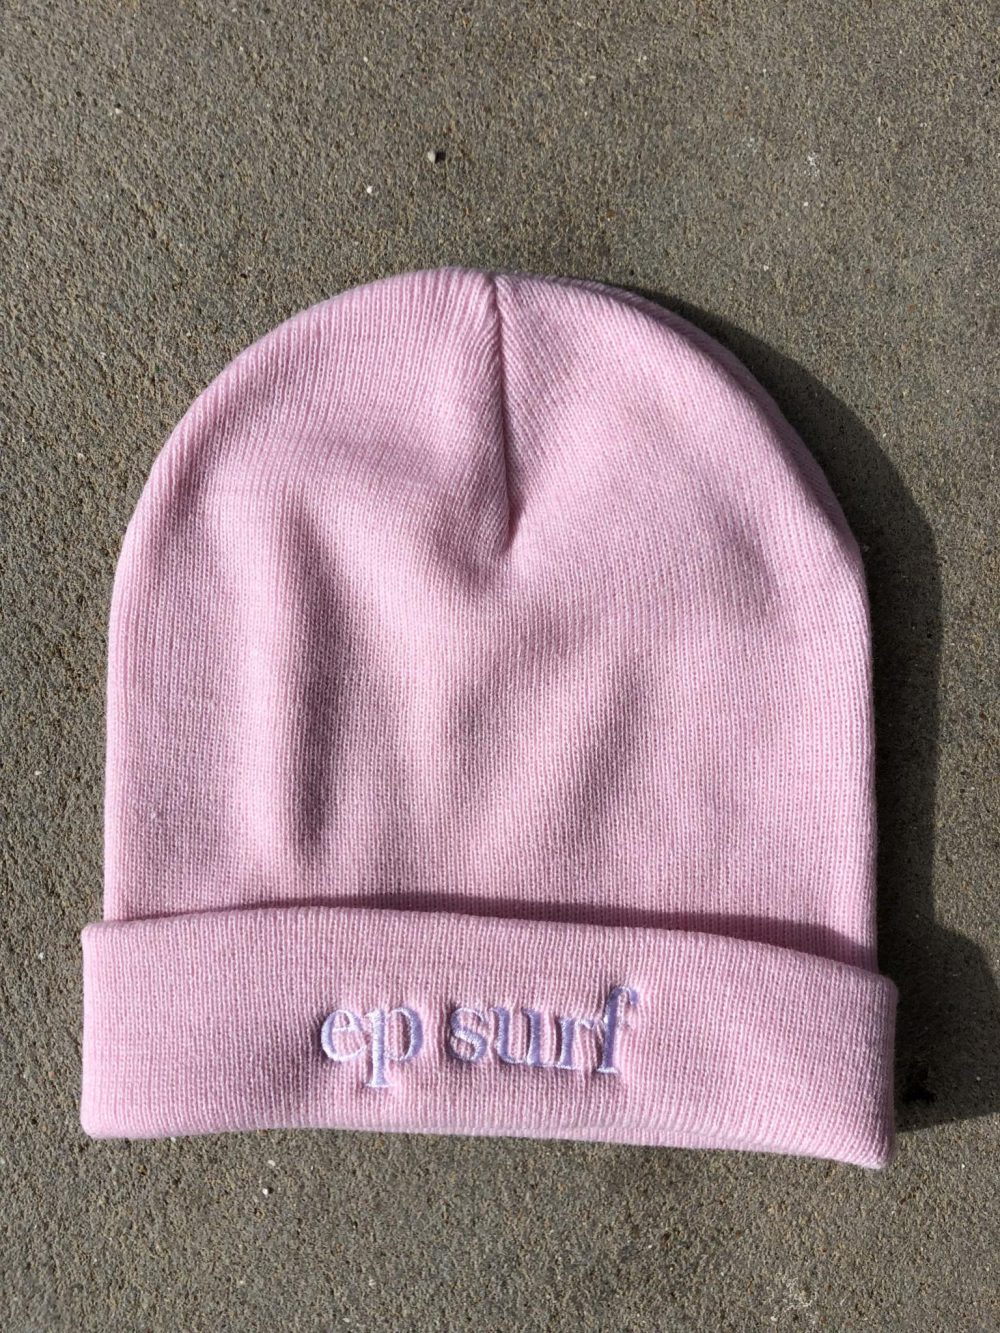 EPBCORE Pink/white Ep Surf Ep Beanie Core Generic Beanies Accessories Accessories